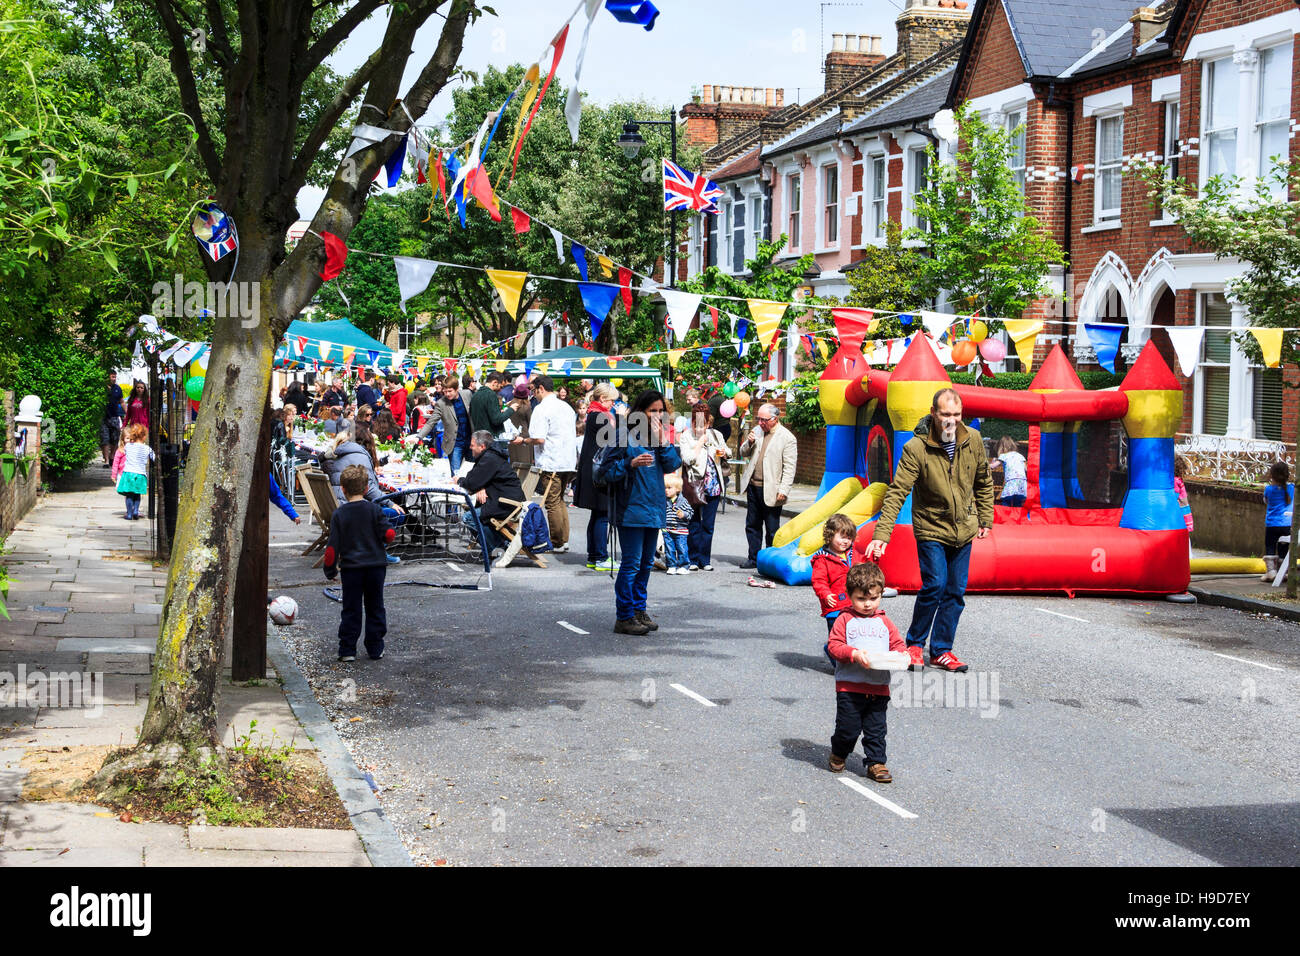 A street party marking the Queen's diamond jubilee in 2012, North London, UK Stock Photo